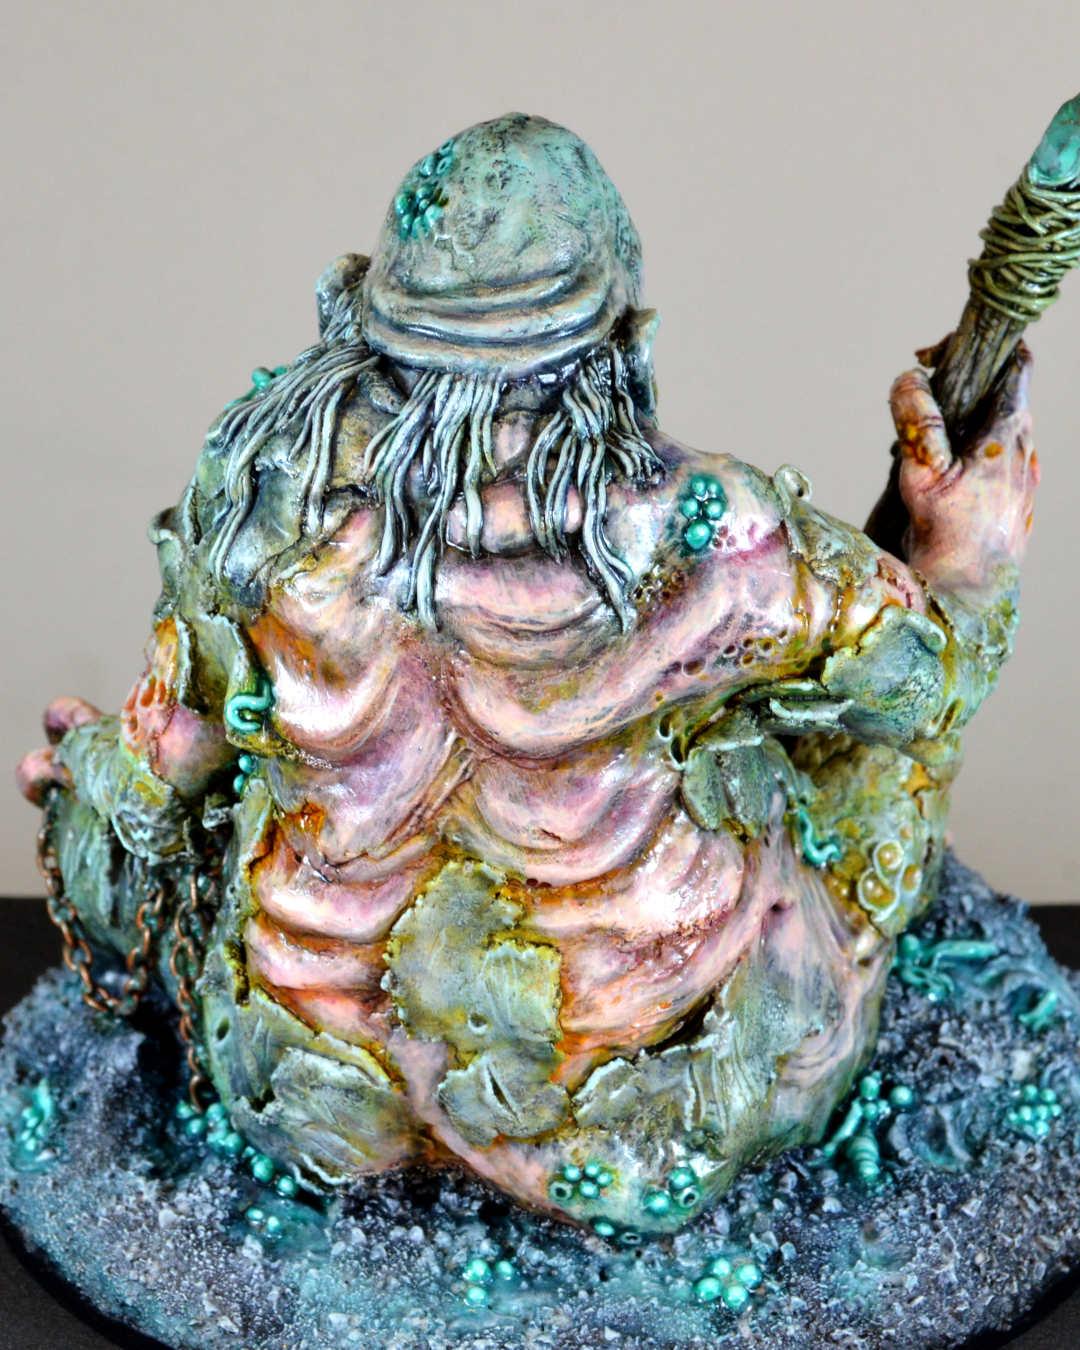 Age Of Sigmar, Chaos, Conversion, Daemons, Do-it-yourself, Great Unclean One, Kitbash, Maggotkin, Nurgle, Plaguebearers, Scratch Build, Sculpting, Warhammer 40,000, Warhammer Fantasy